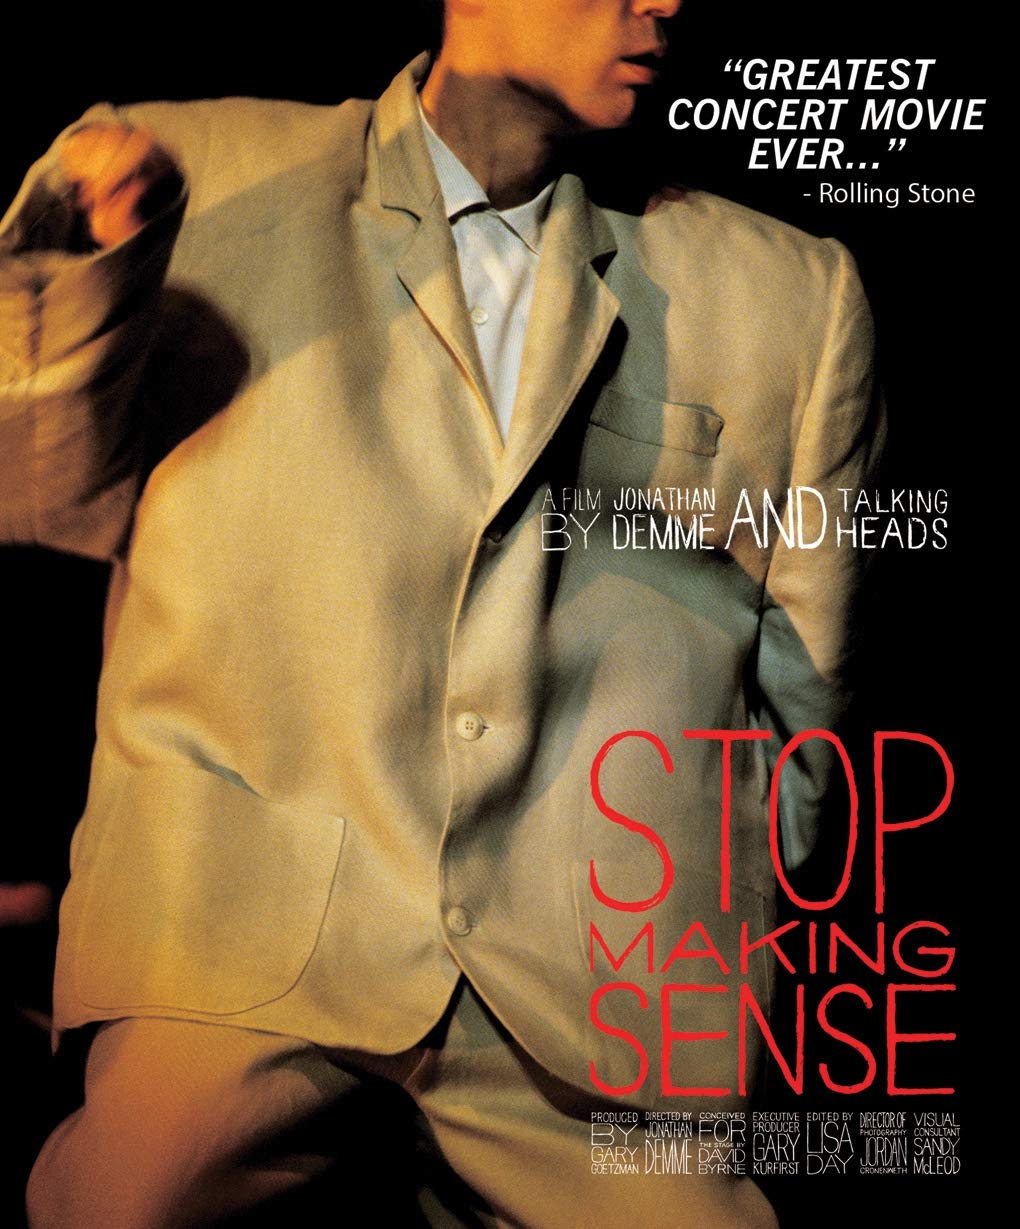 40 Years Later, Talking Heads' 'Stop Making Sense' Documentary is Back